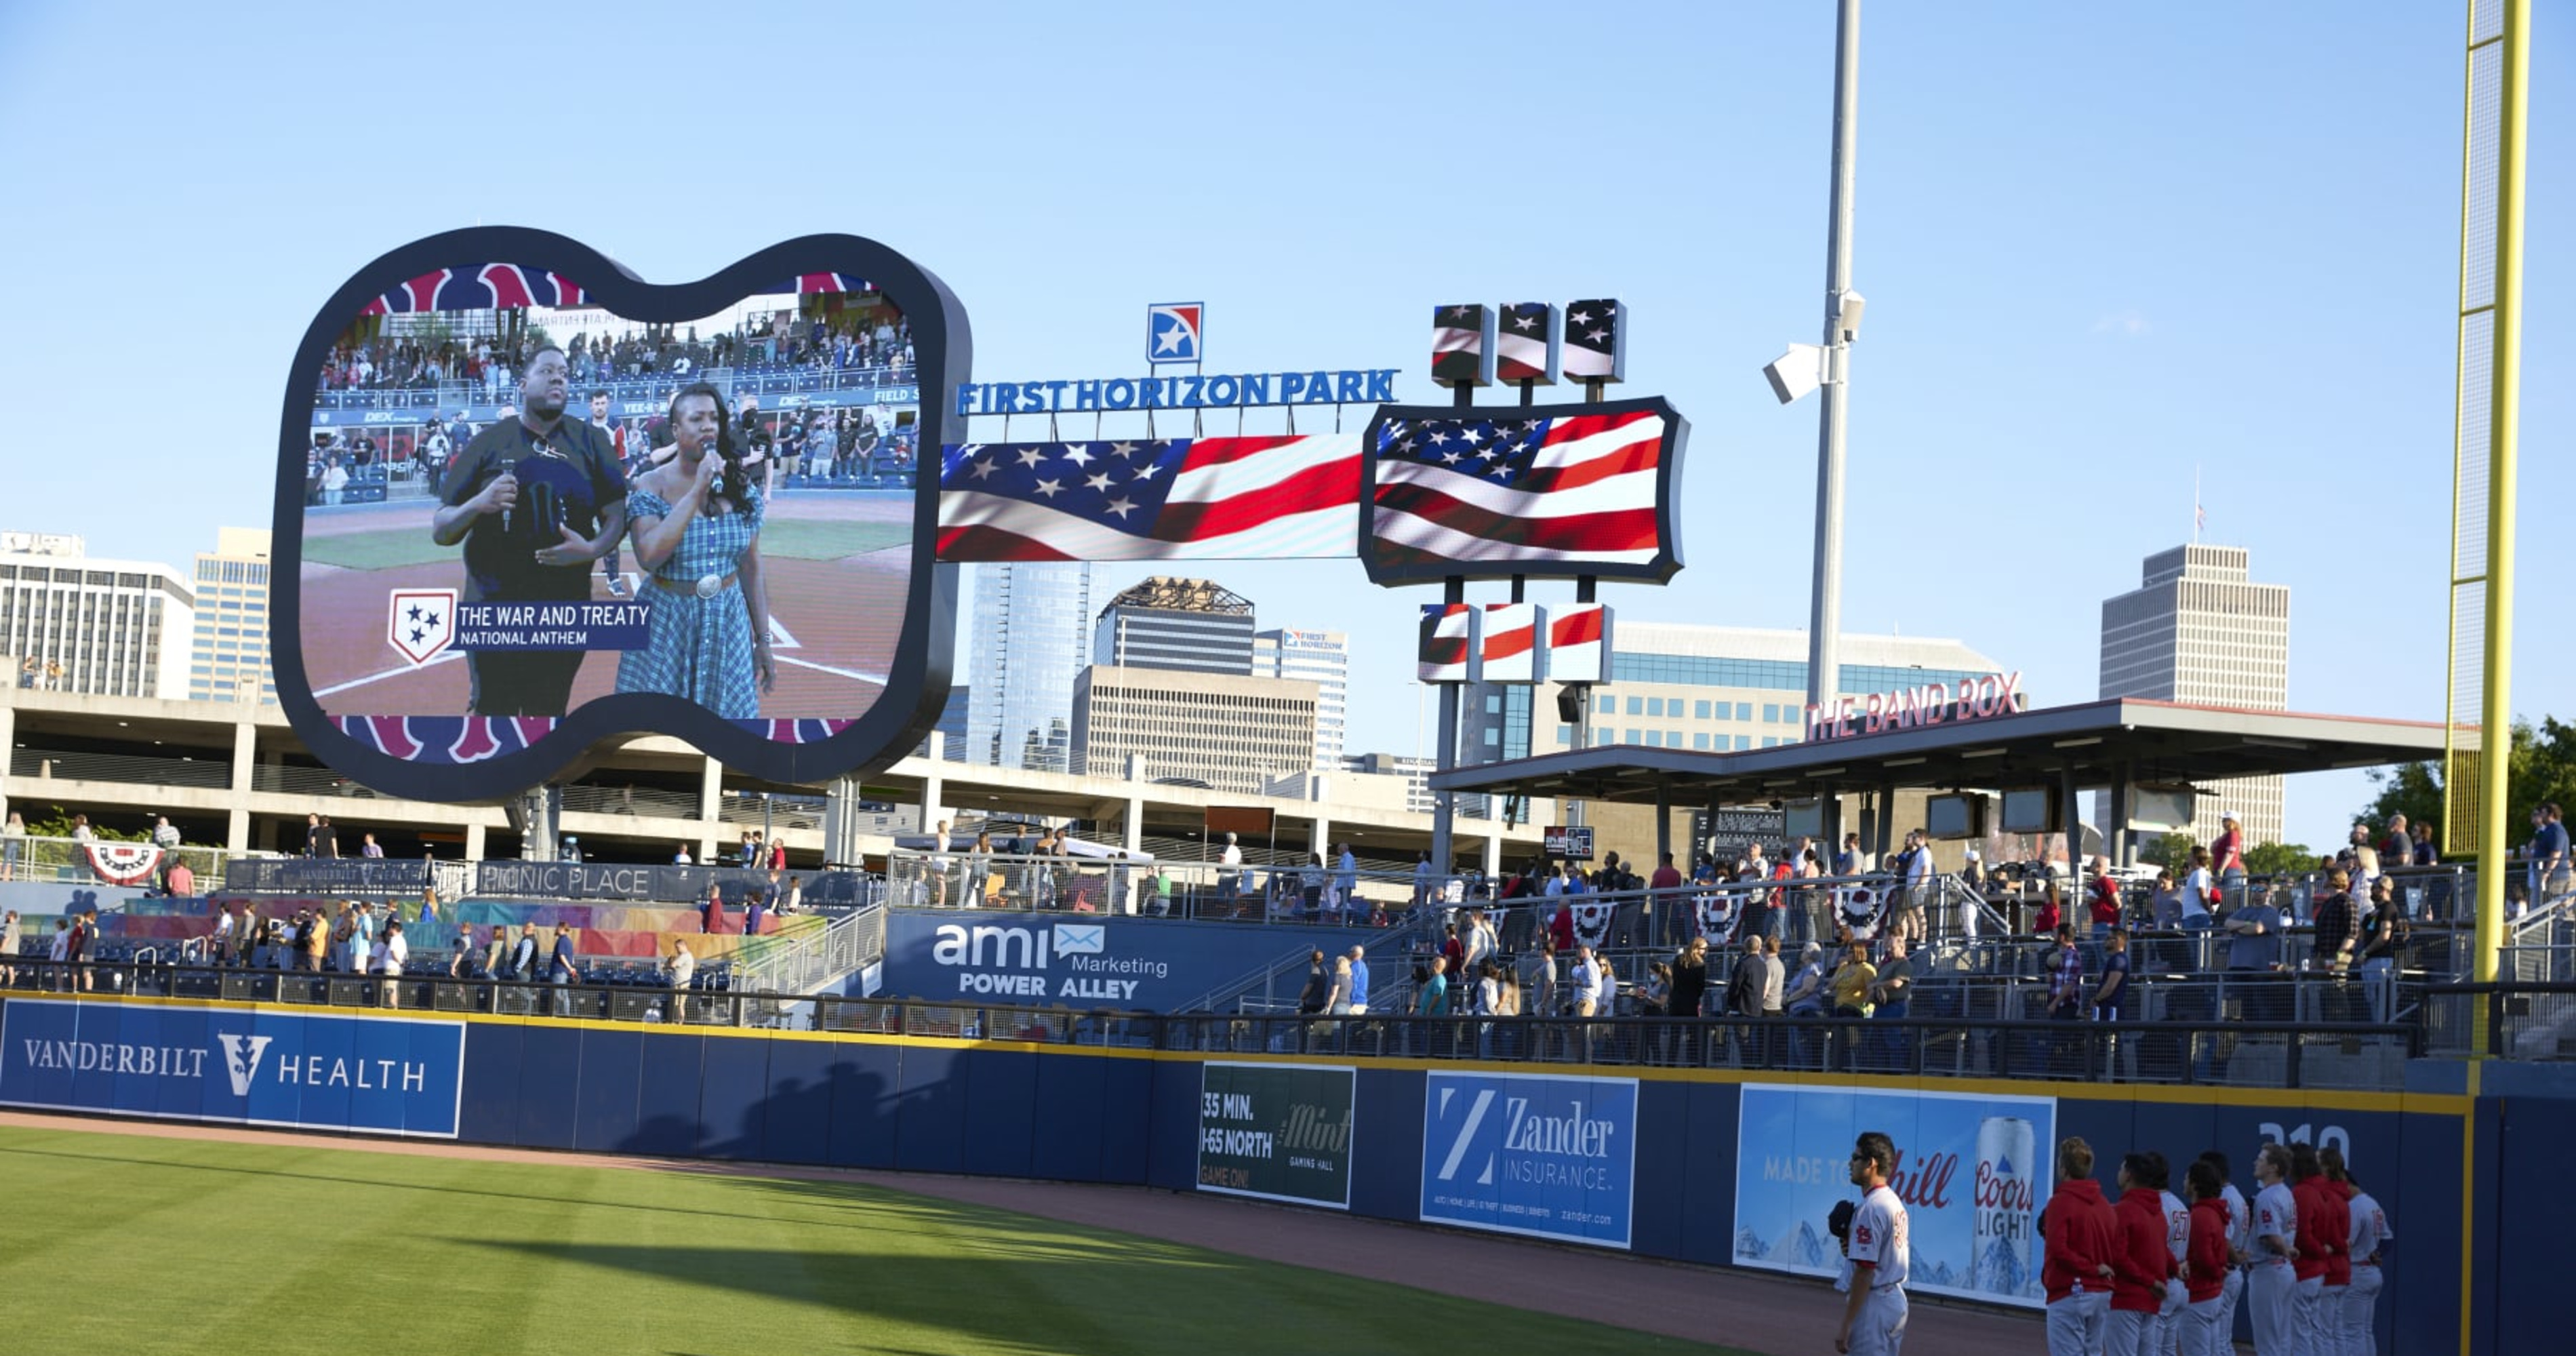 MLB Players Vote for Nashville as Best Potential Expansion City